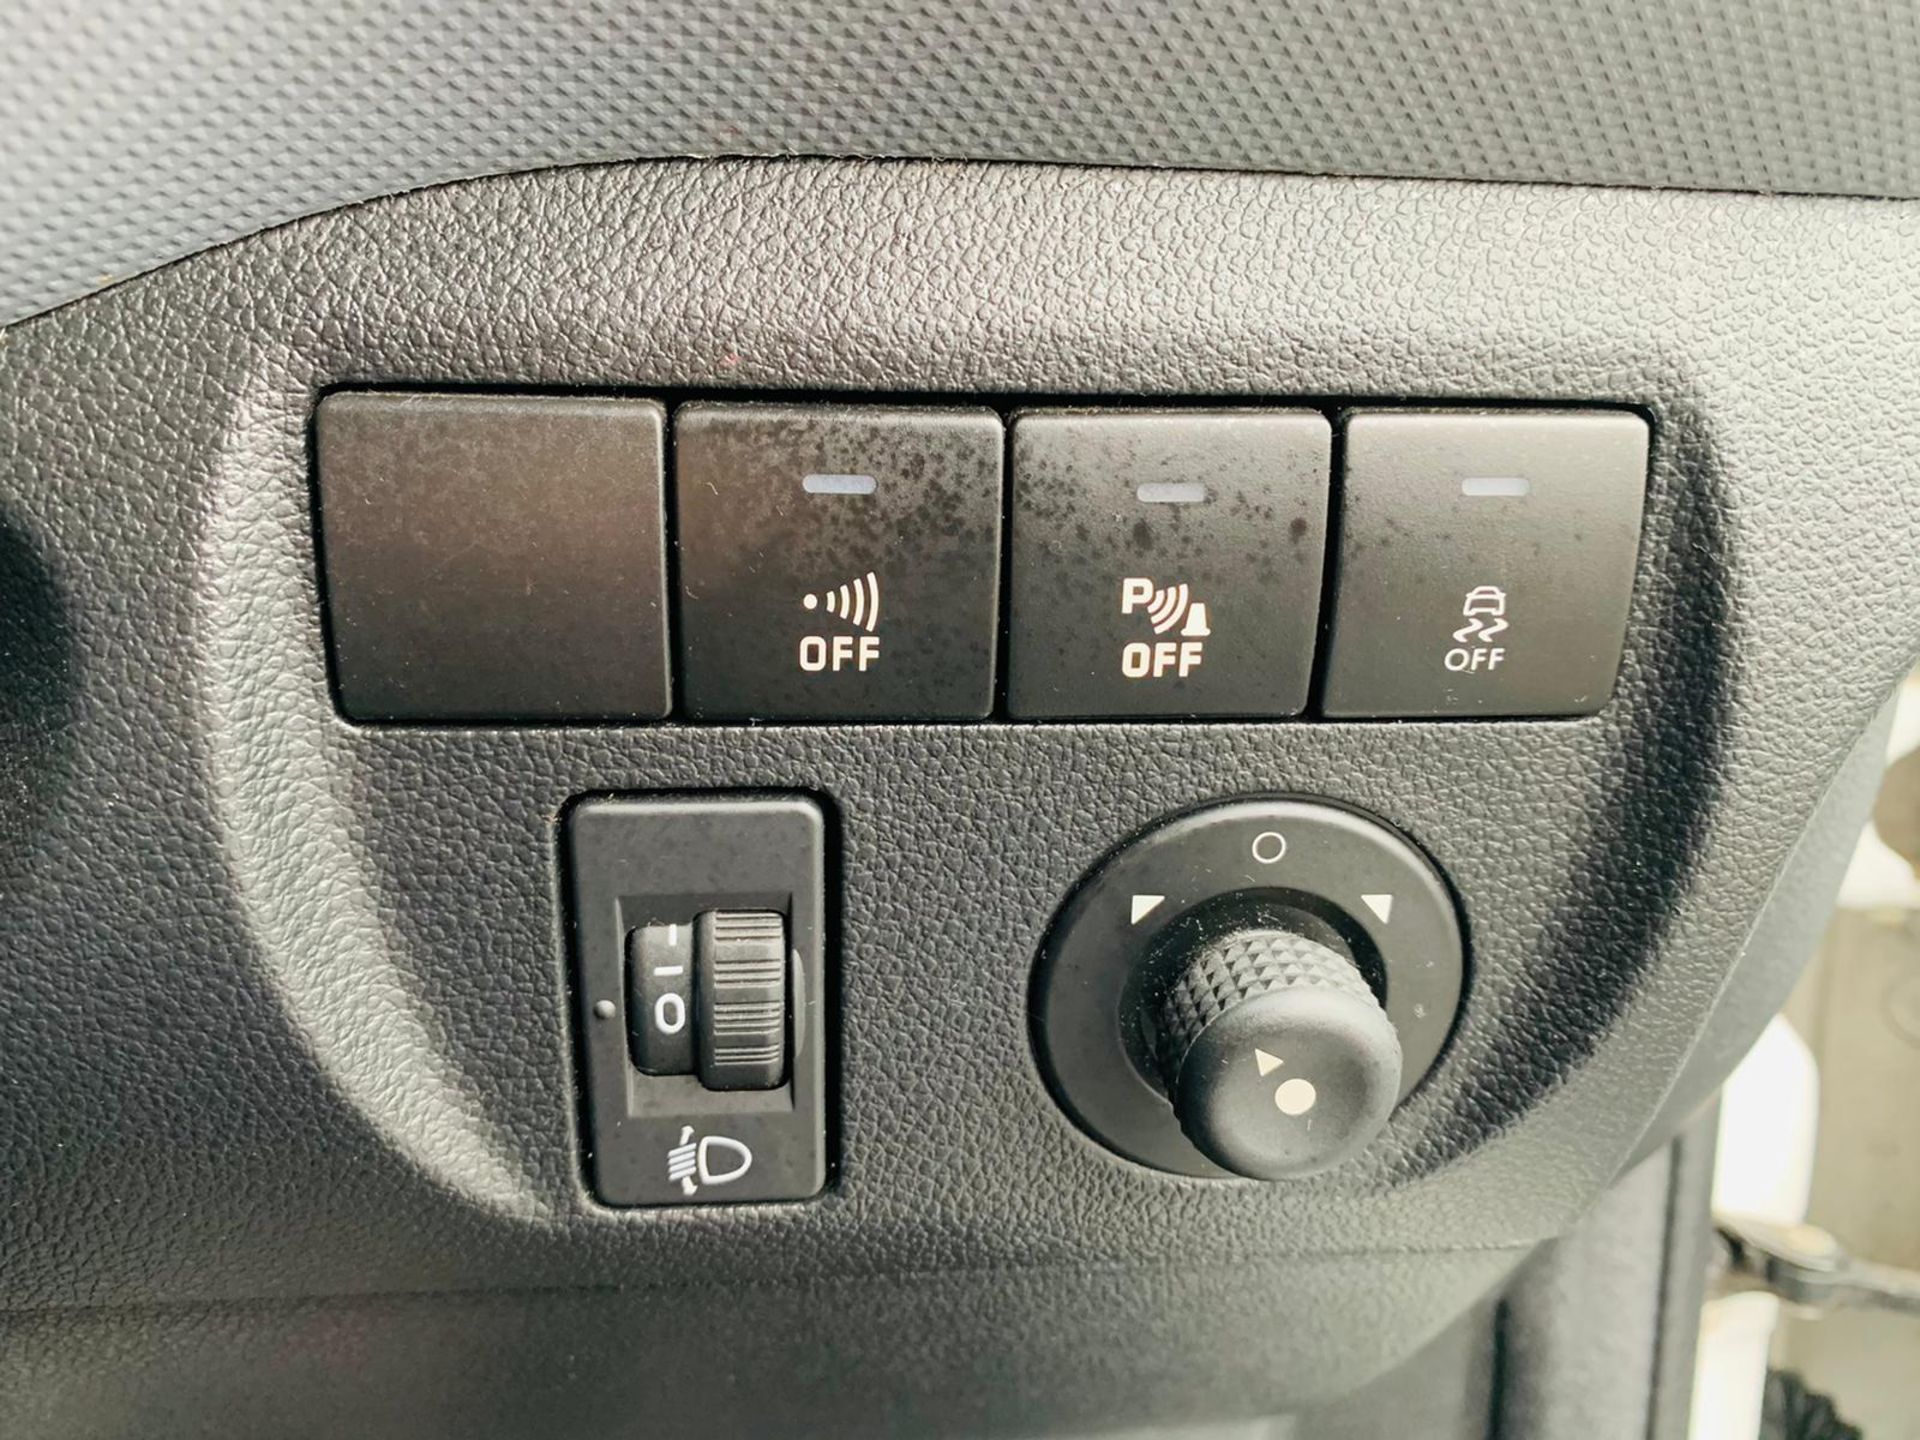 (RESERVE MET) Peugeot Partner 1.6 HDI Professional - 2017 Model - Air Con - Service History - Image 20 of 22